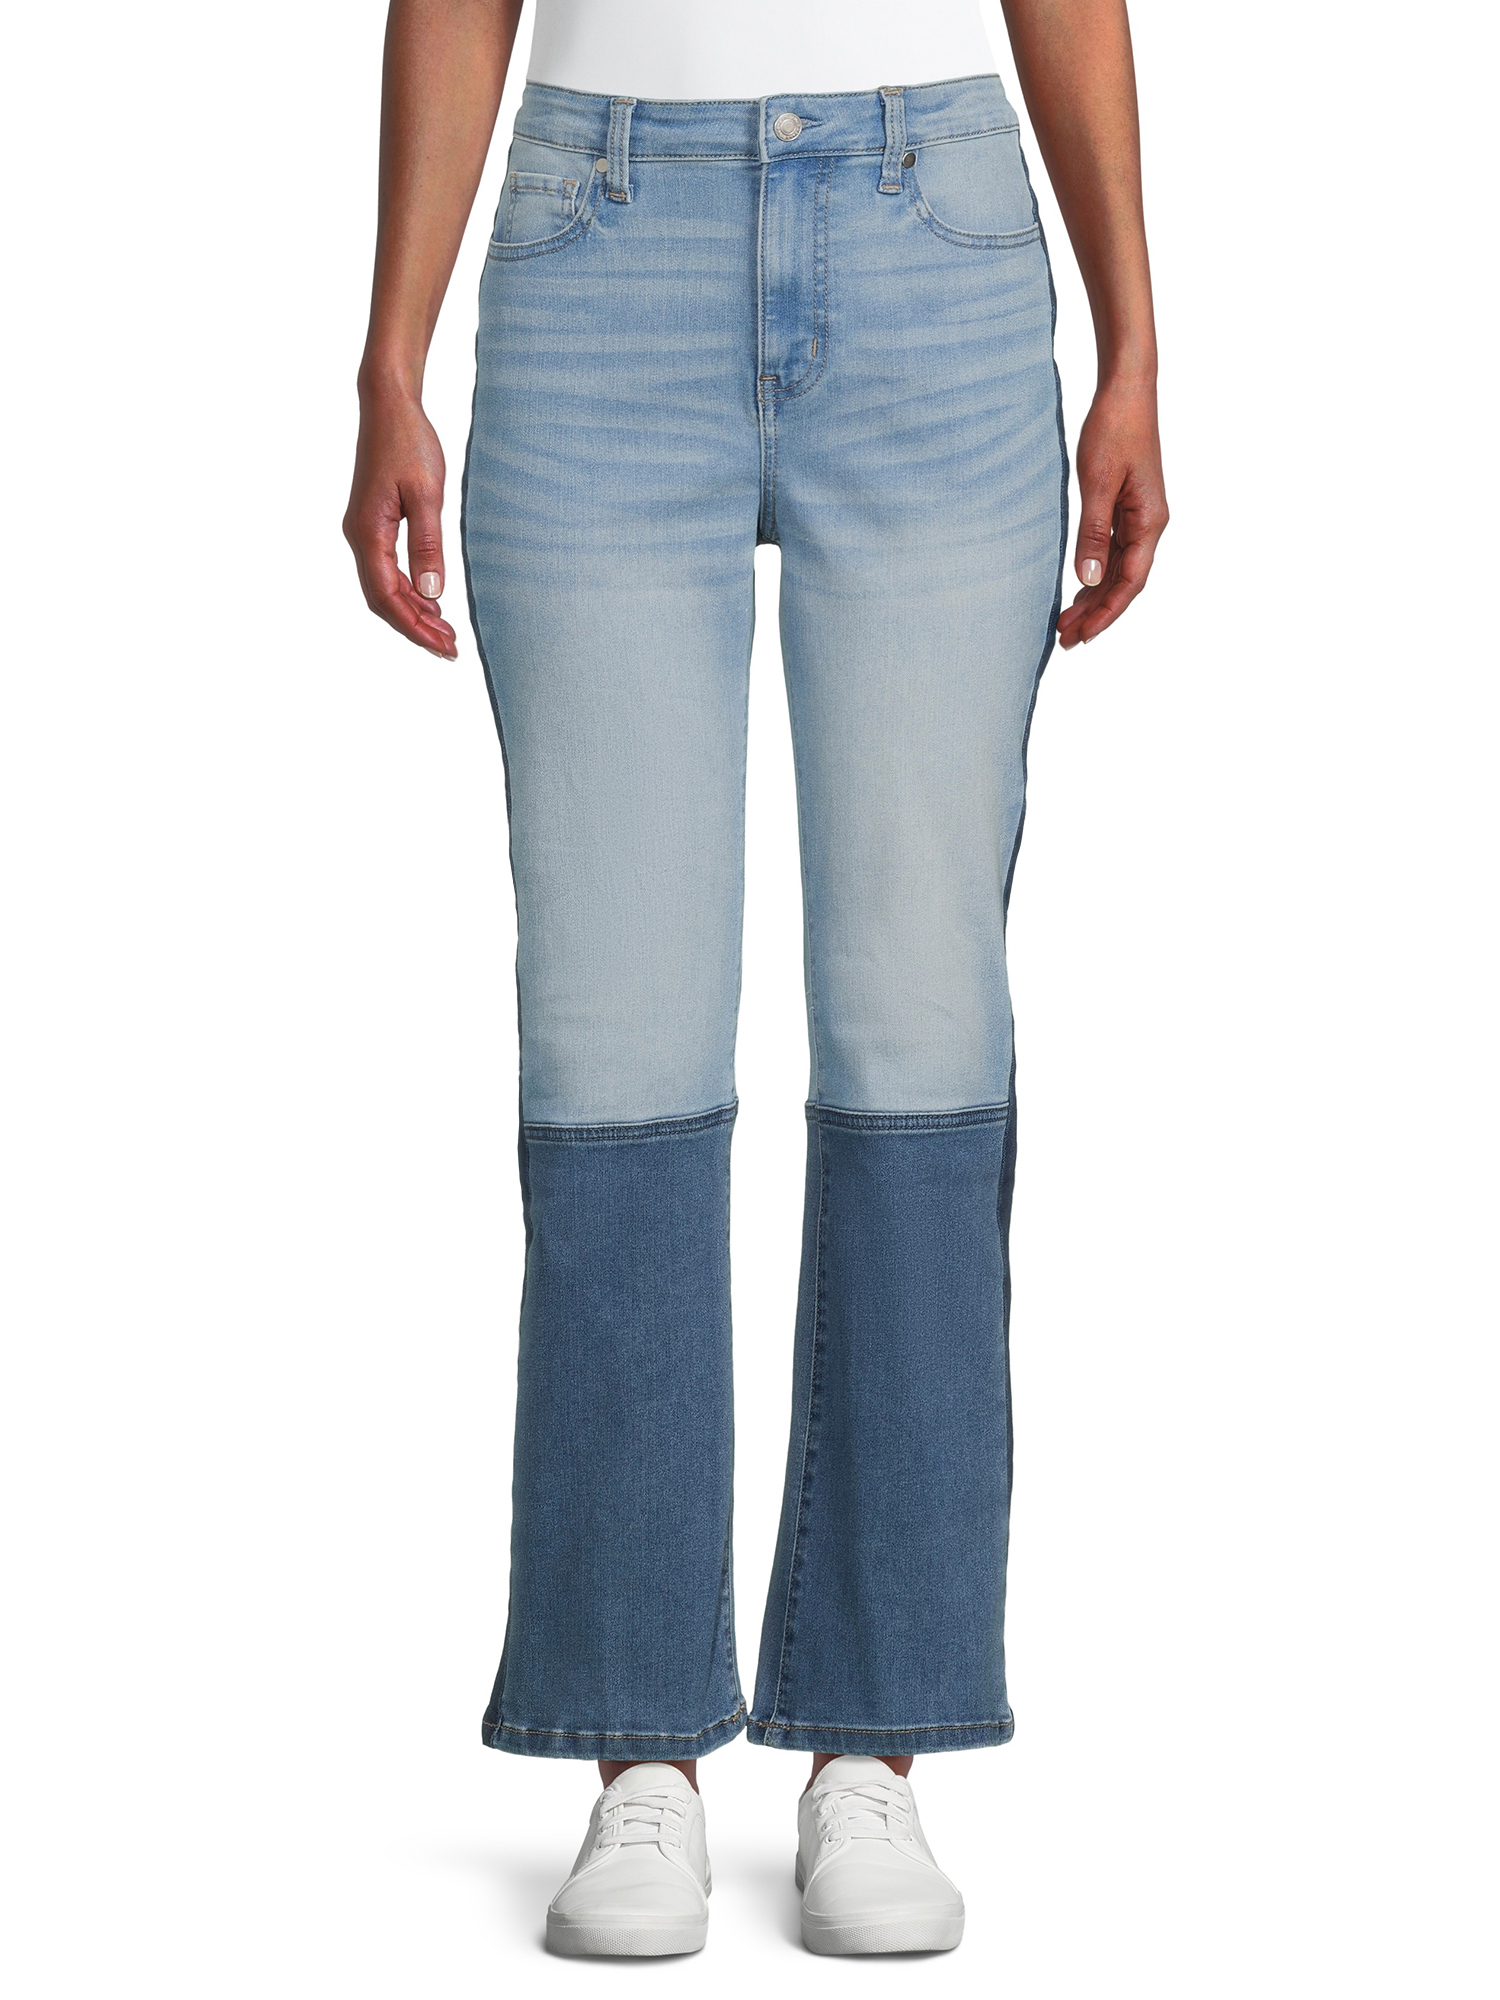 Time and Tru Women's Colorblocked Bootcut Jeans - image 1 of 6